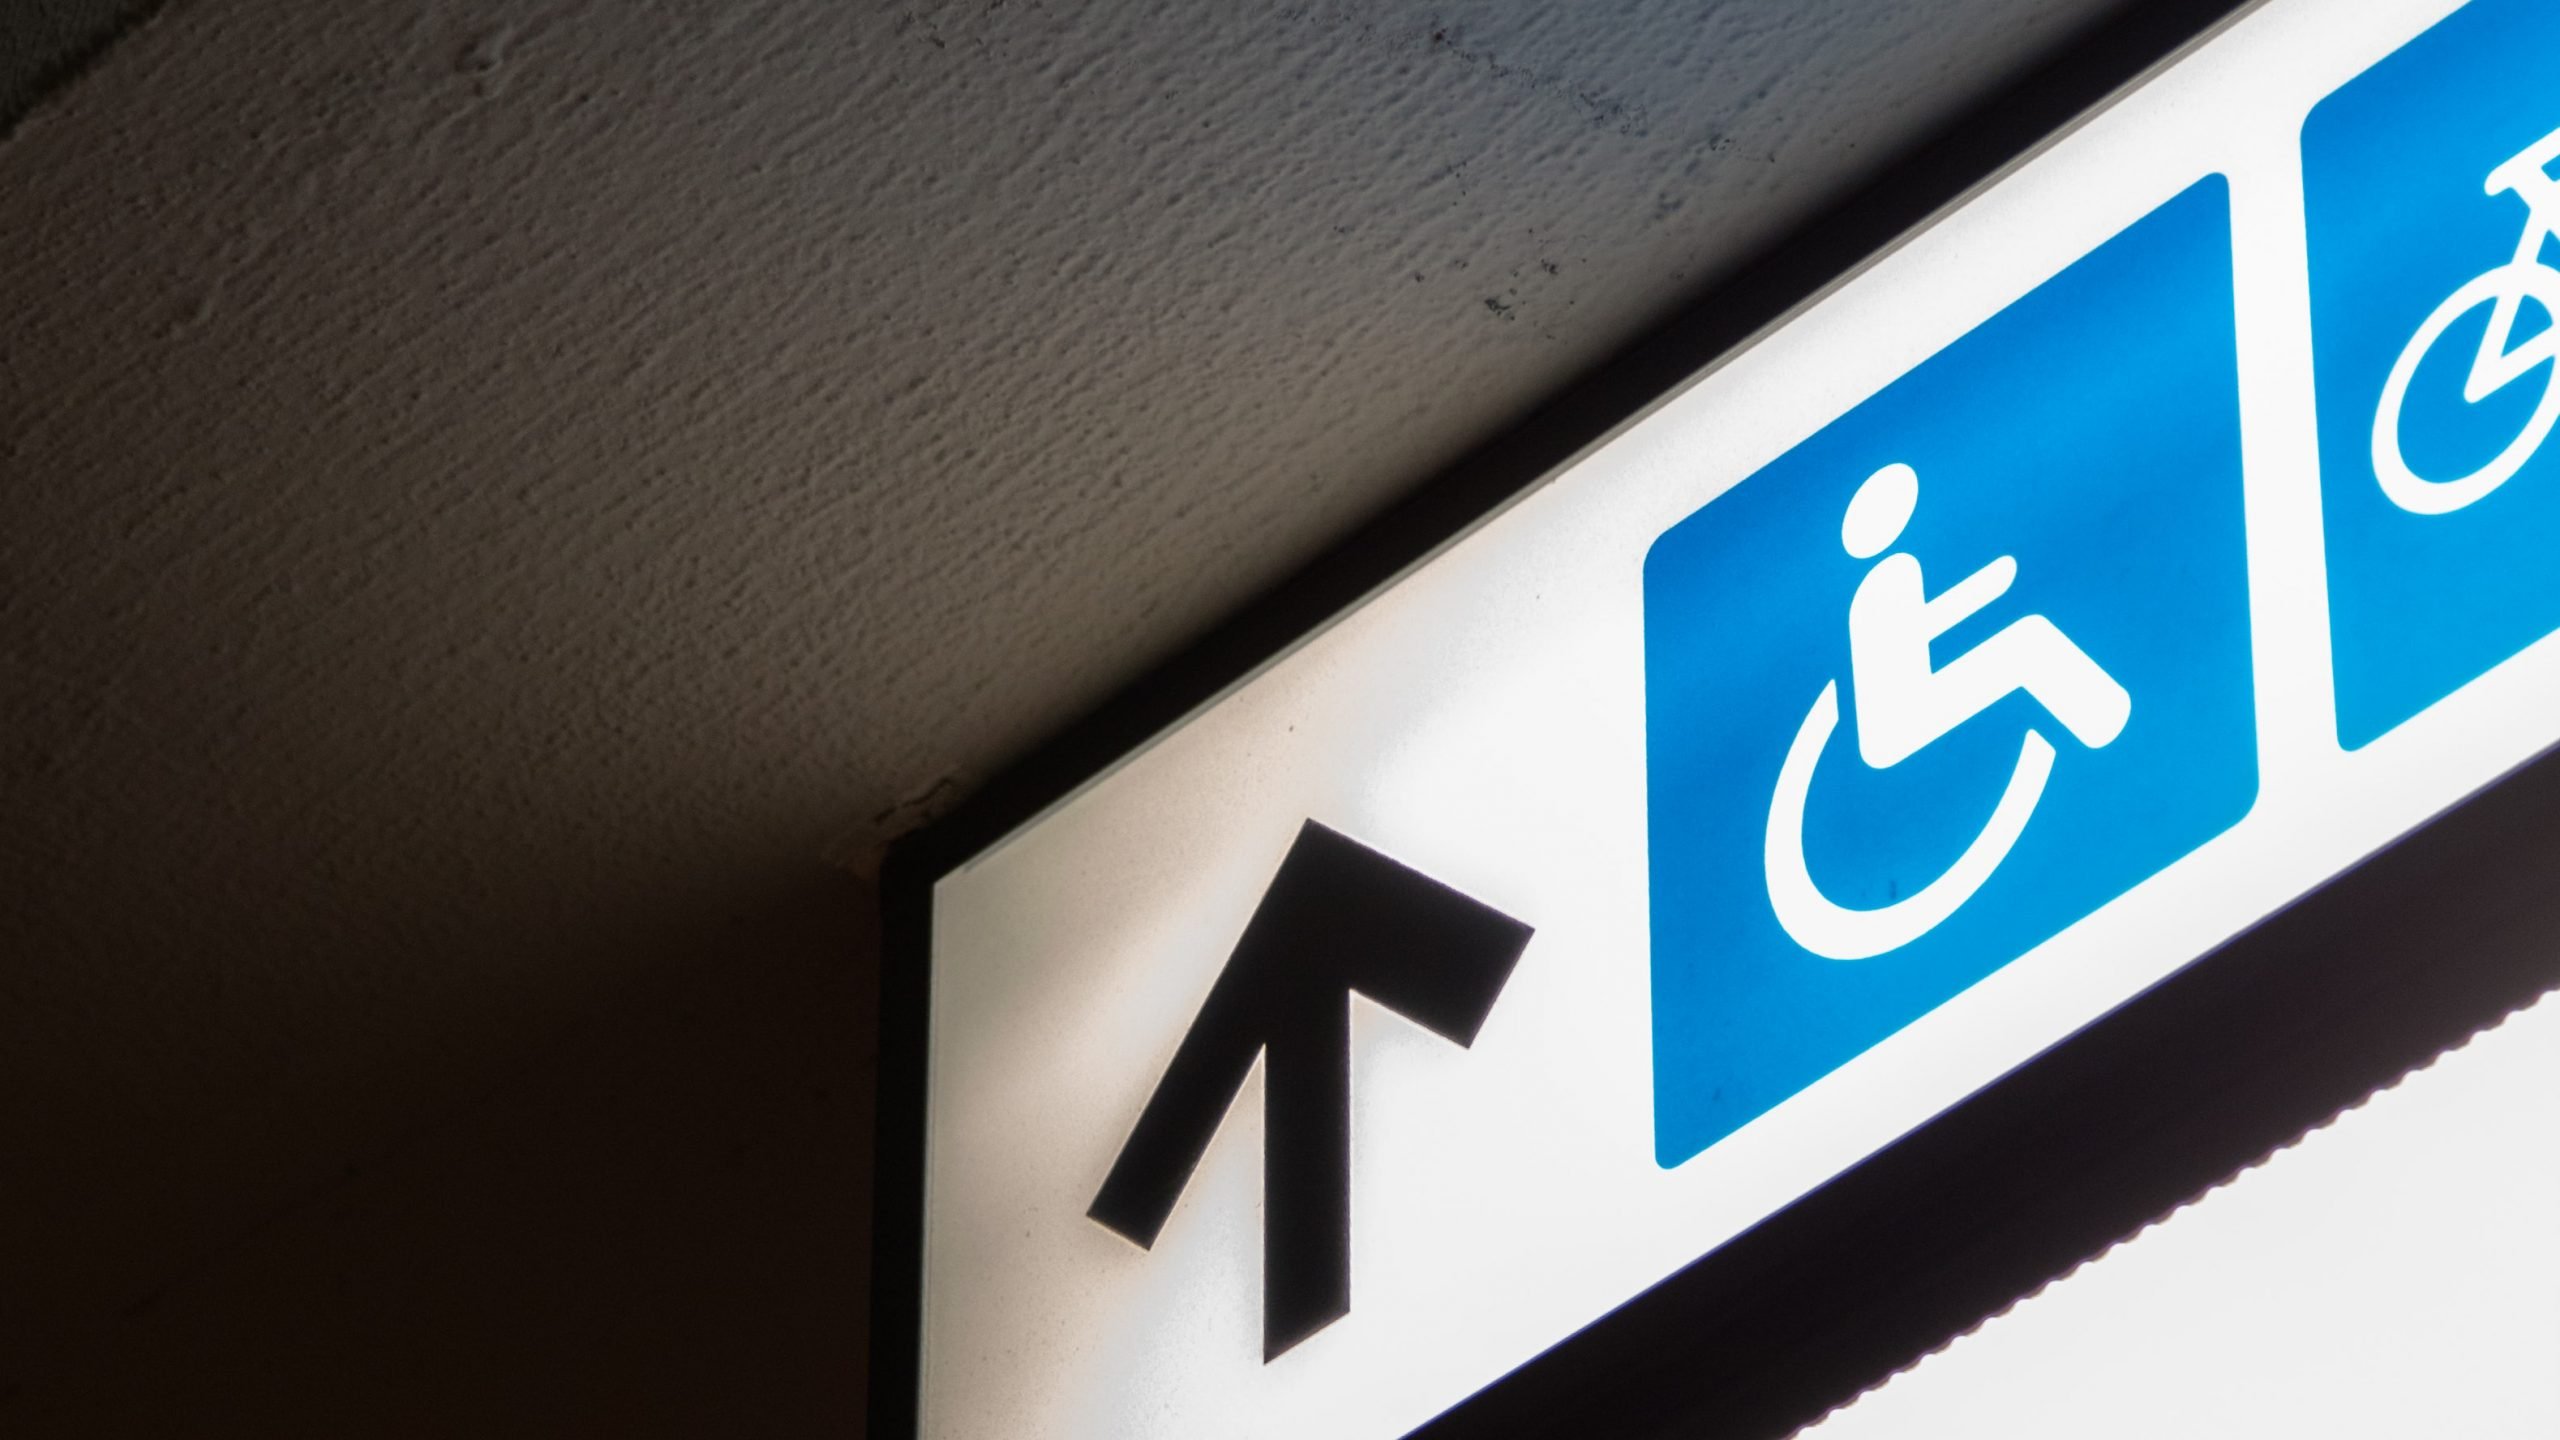 disabled sign on the ceiling with an arrow pointing upwards